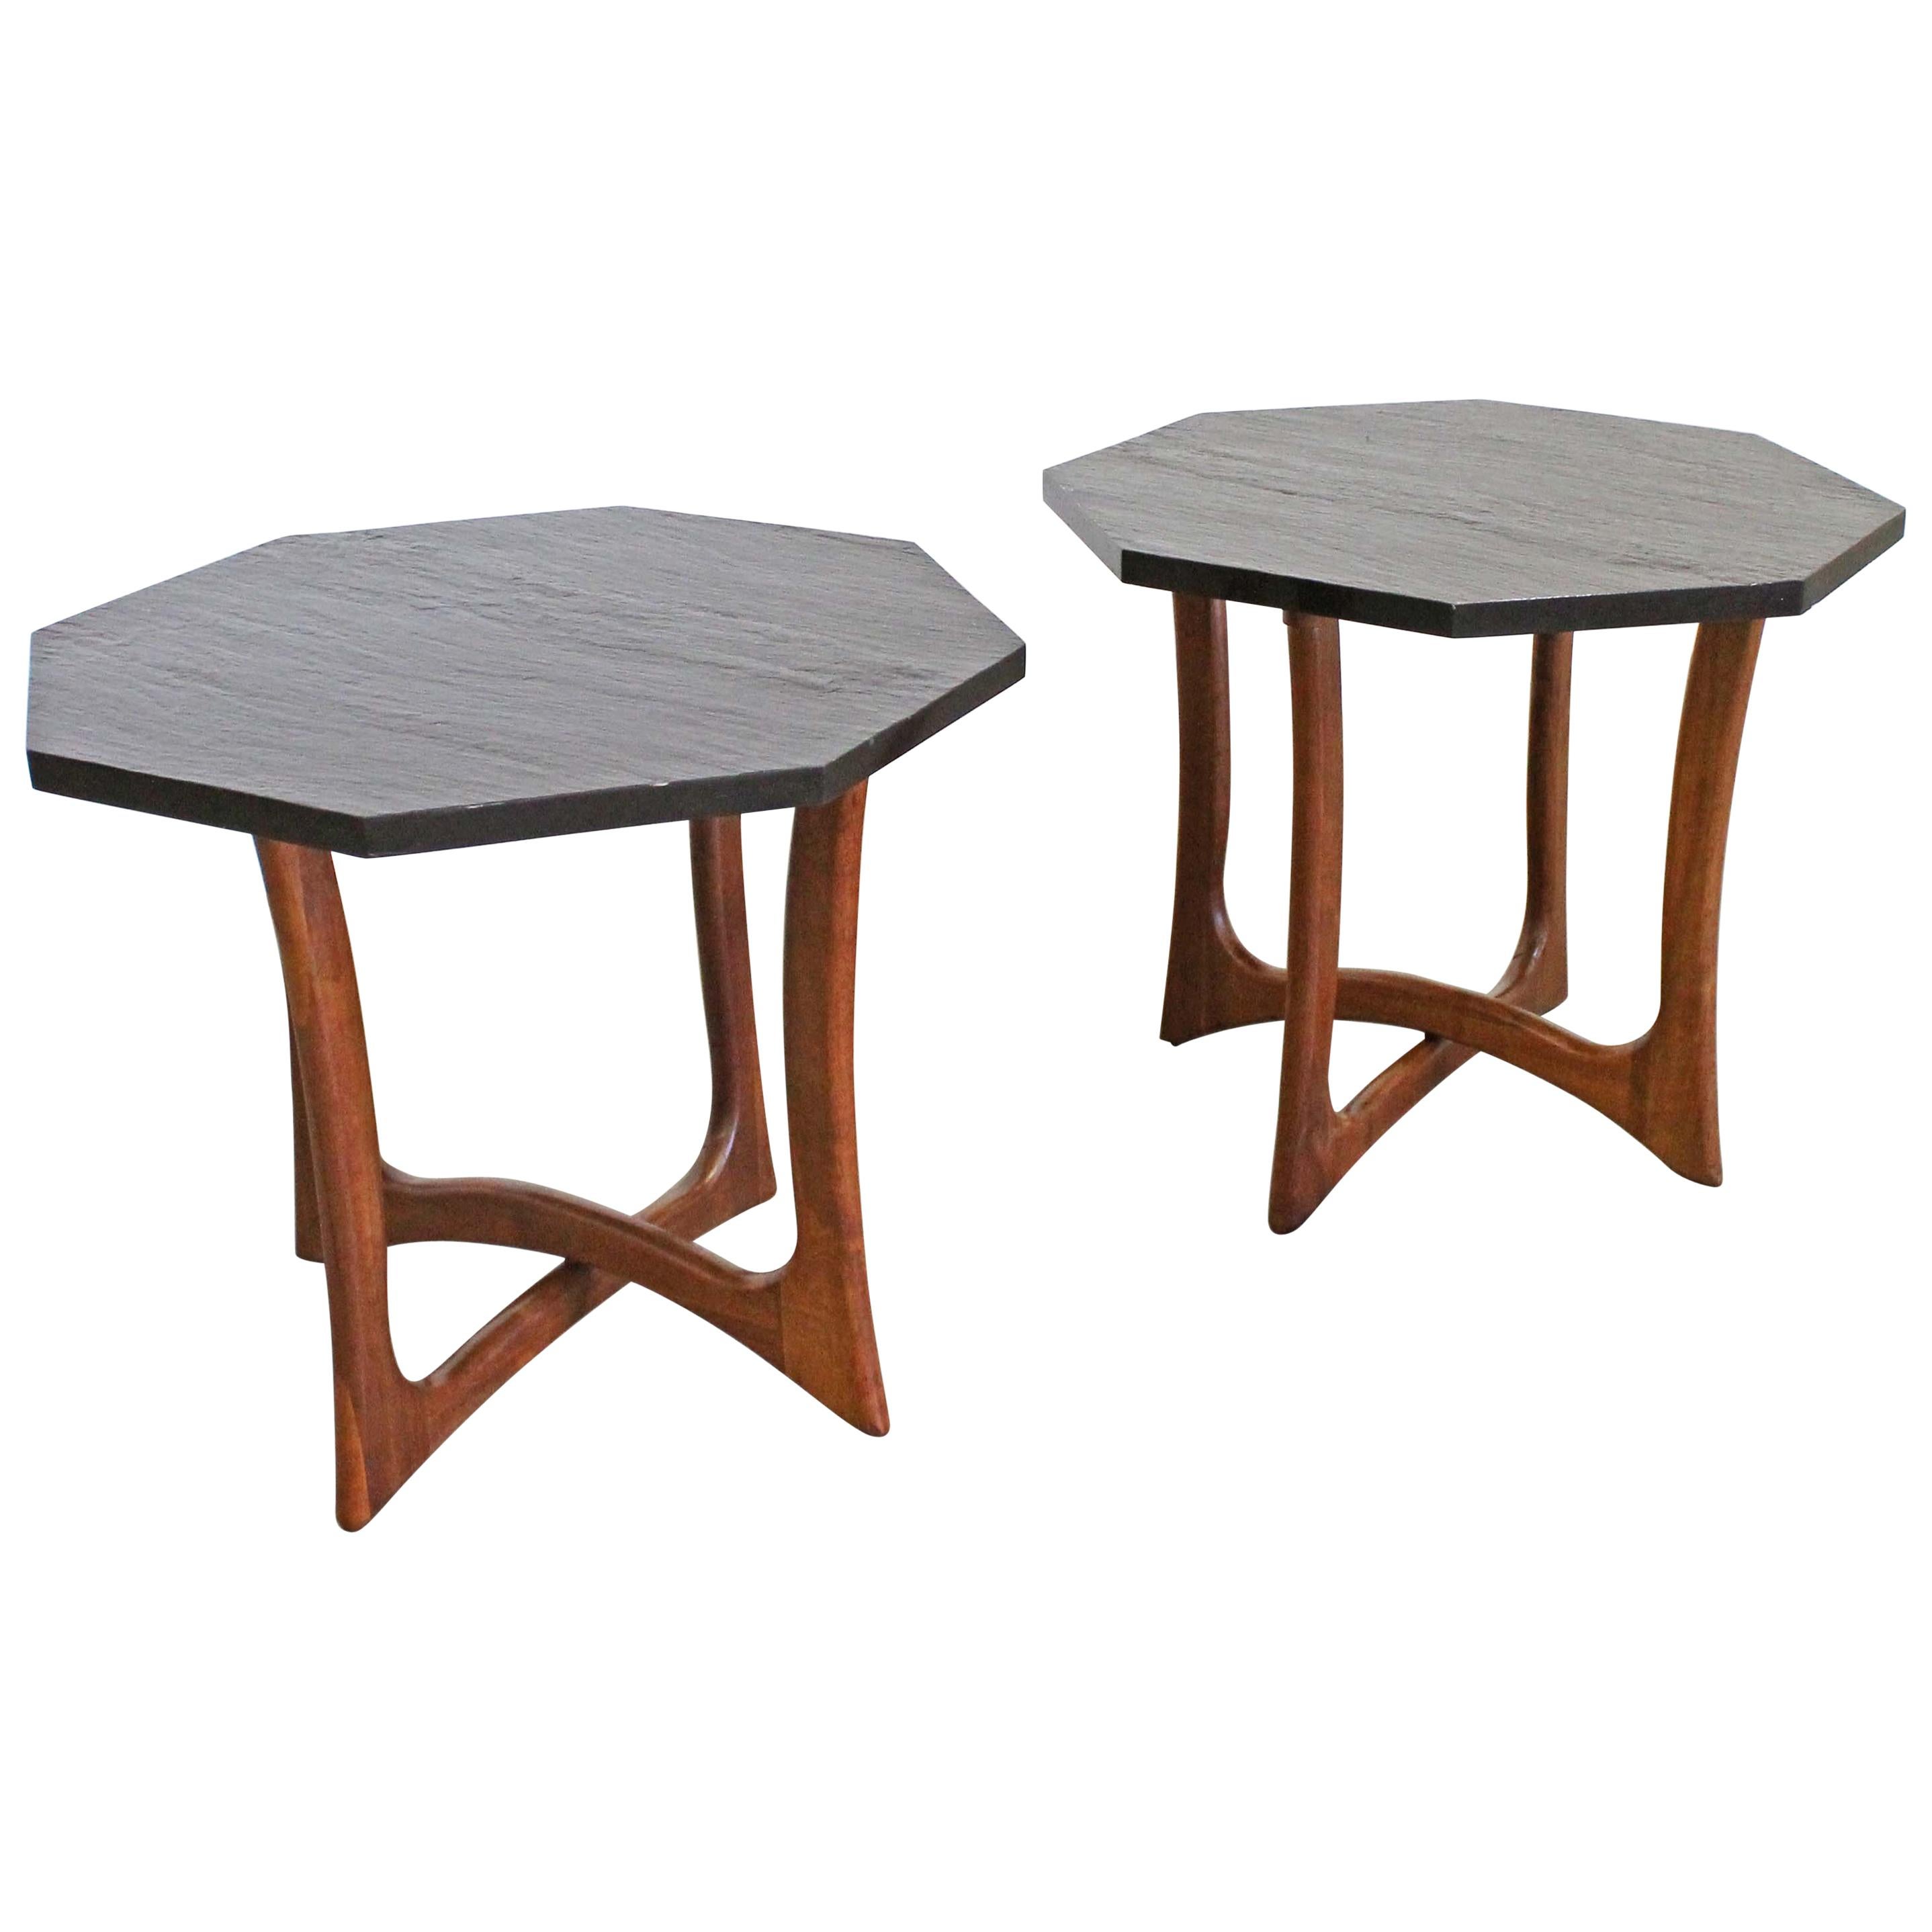 Pair of Mid-Century Modern Adrian Pearsall Sculptural Slate End Tables